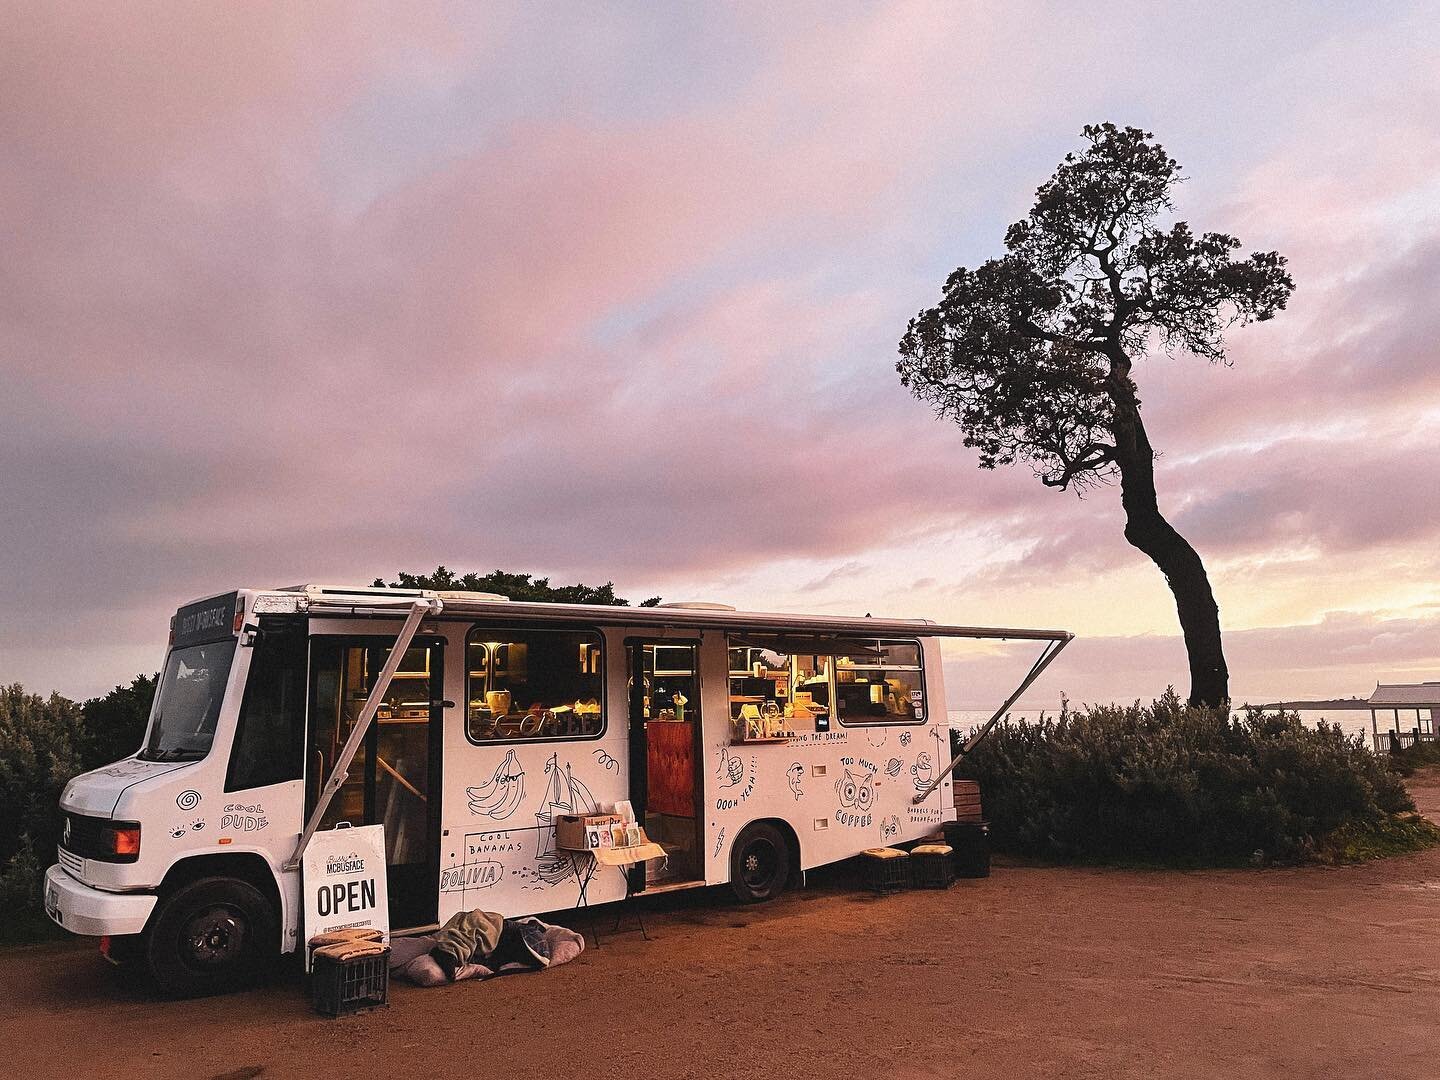 Start of a new week &amp; let&rsquo;s make it a great week, but first coffee 🤗
&bull;
&bull;
&bull;
&bull;
#bussymcbusfacecoffee #morningtonpeninsula #mtmarthabeach #mtmartha #coffeeonthego #coffeebus #specialitycoffee  #mondaymotivation #morning #w